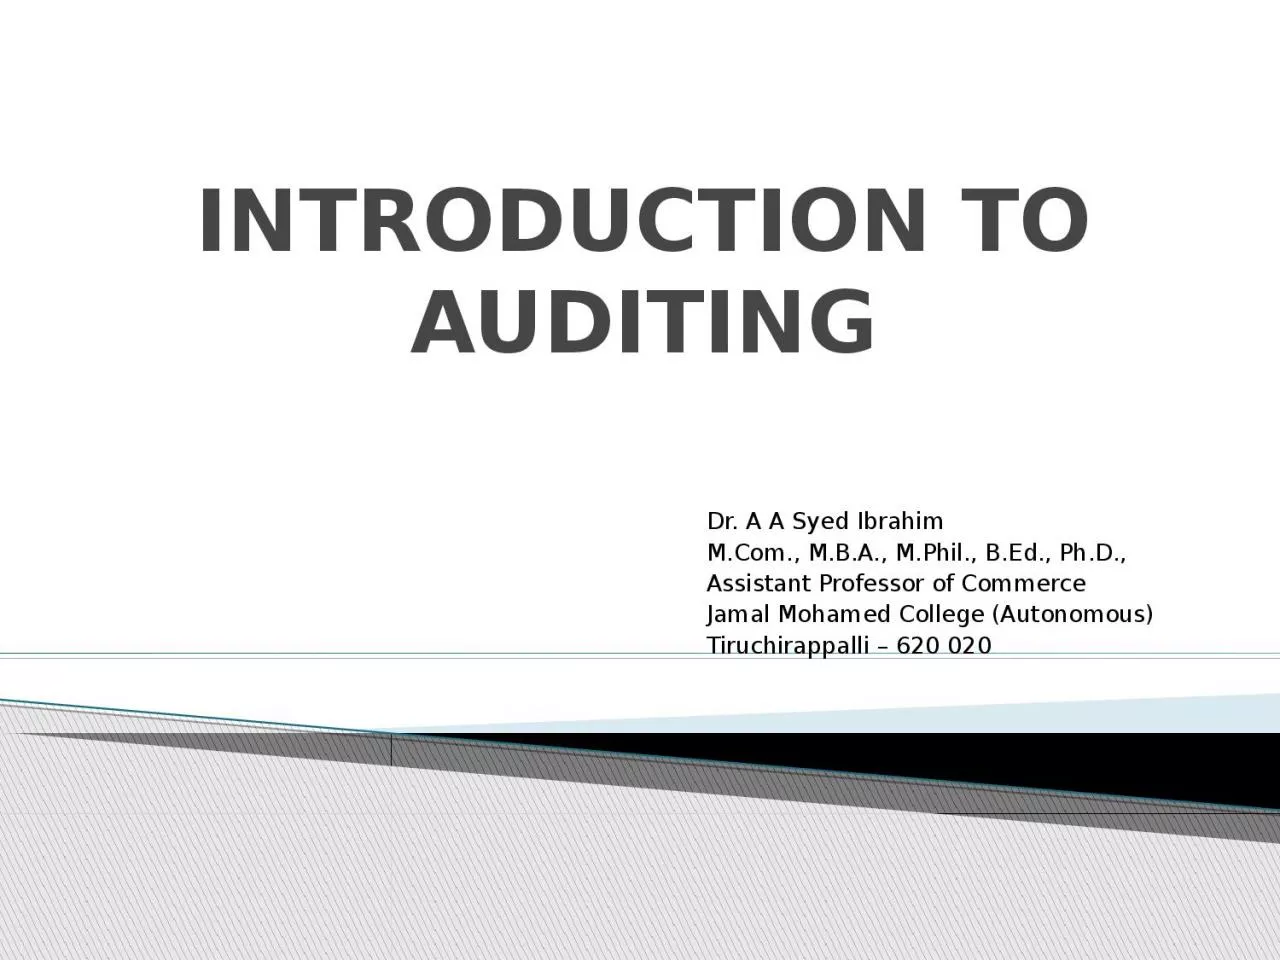 INTRODUCTION TO AUDITING